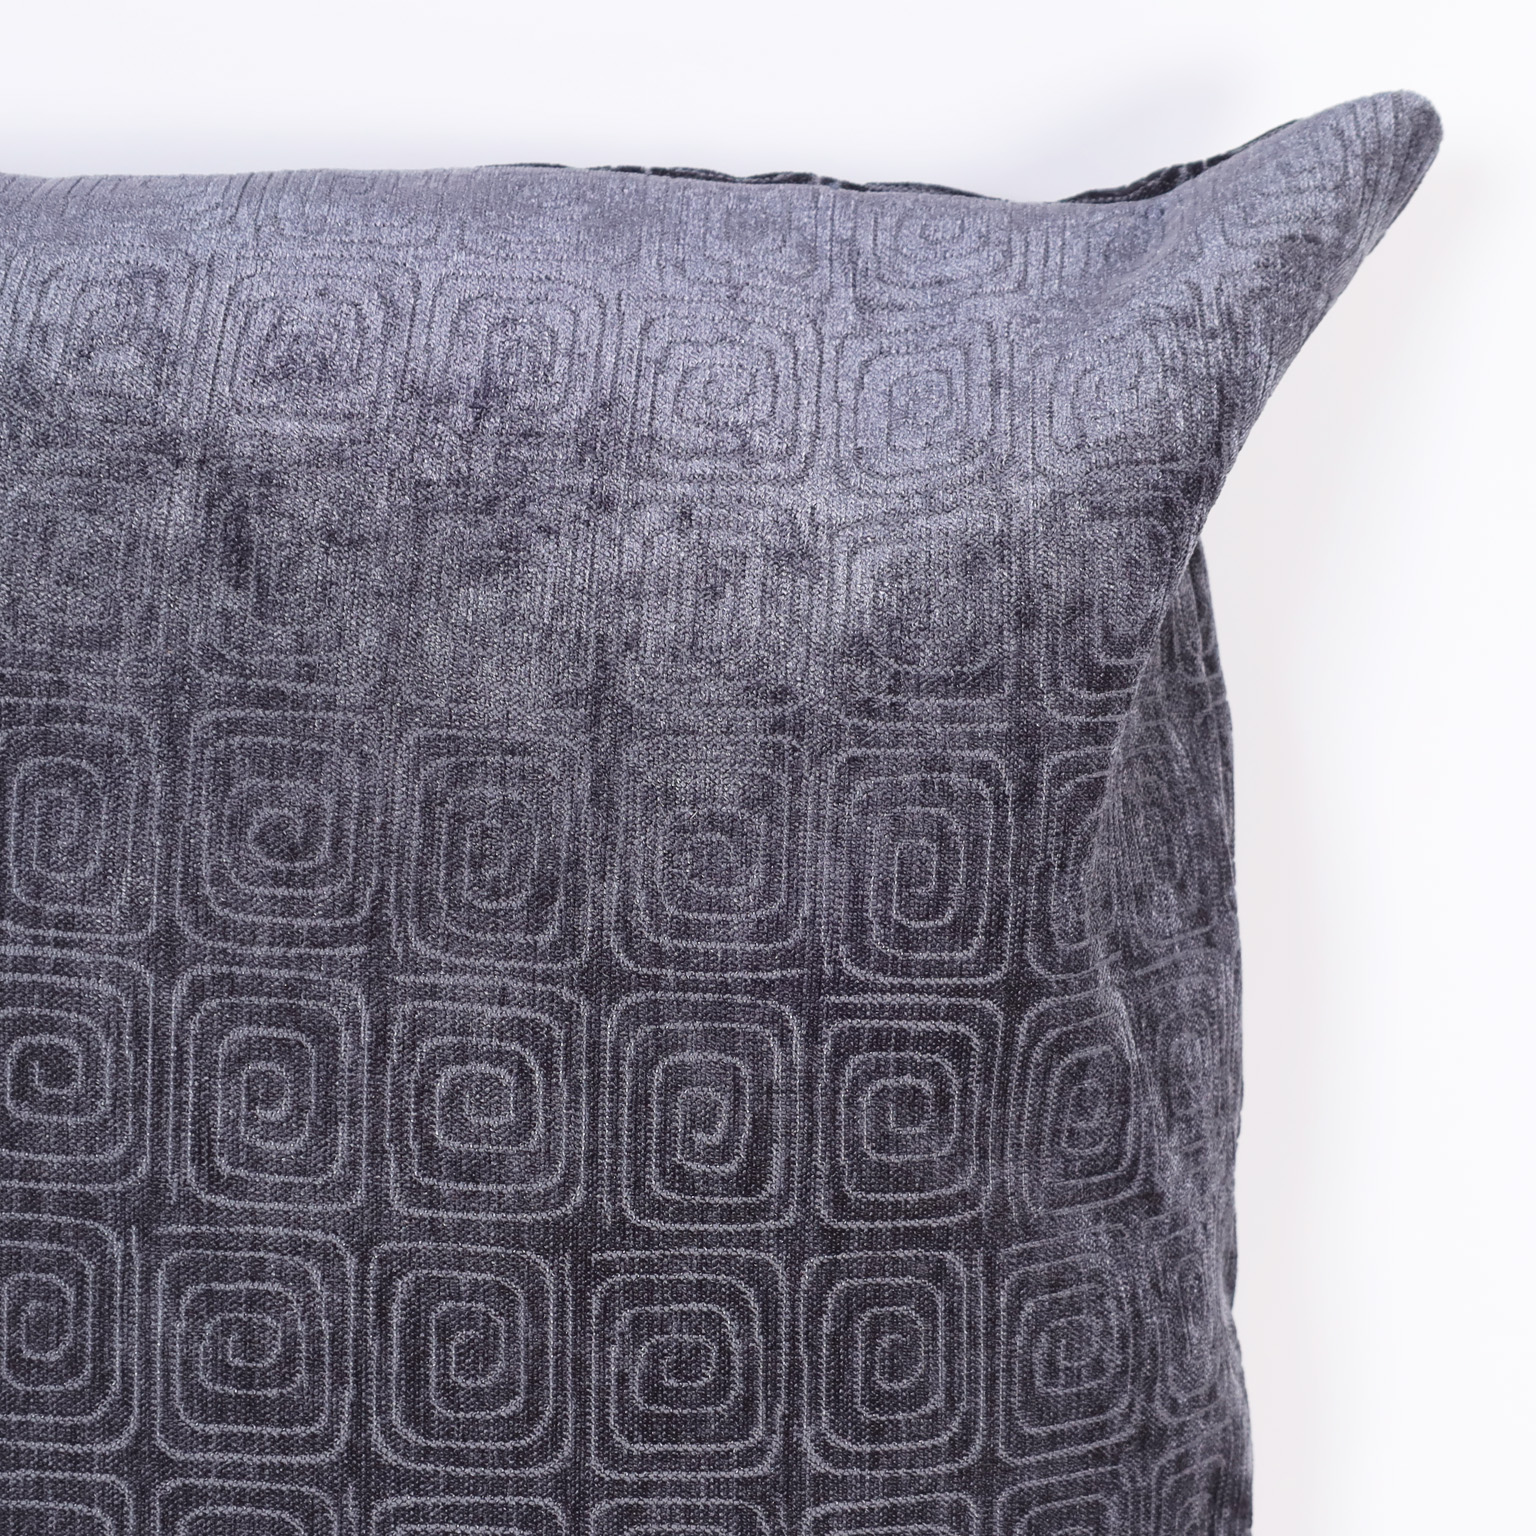 Pair of Pillows with a Modern Design